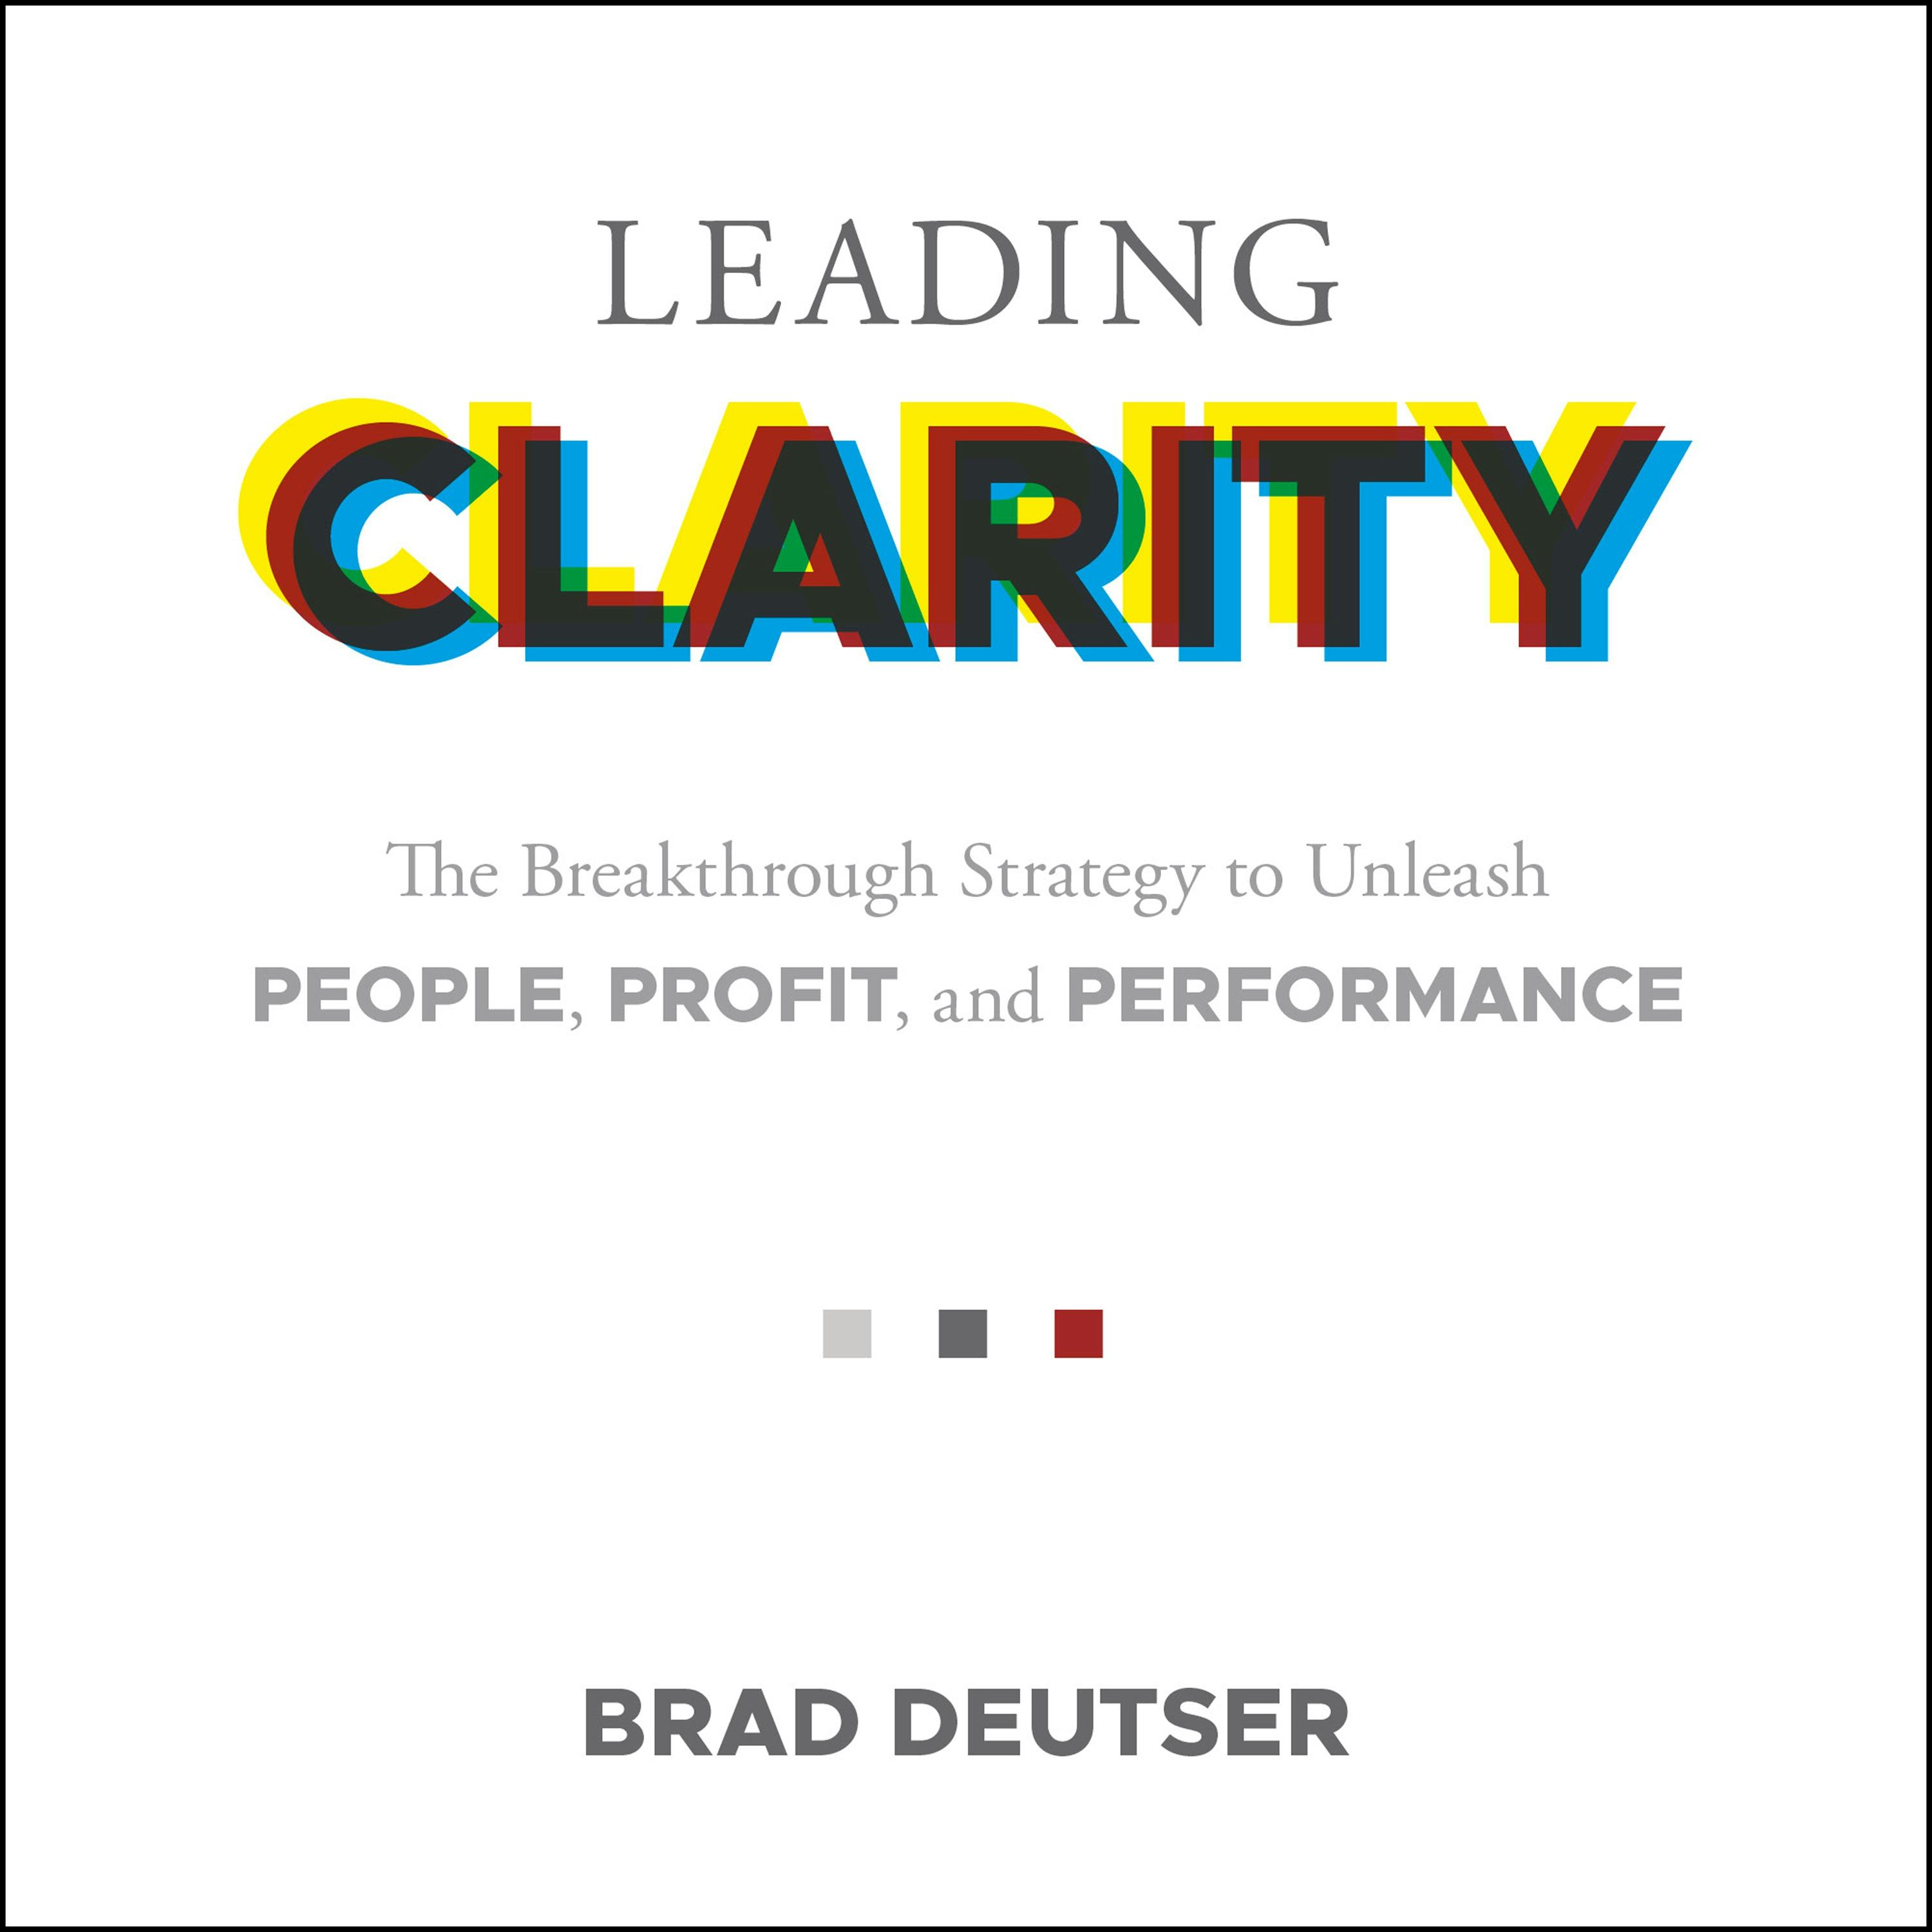 Leading Clarity: The Breakthrough Strategy to Unleash People, Profit and Performance - Brad Deuster